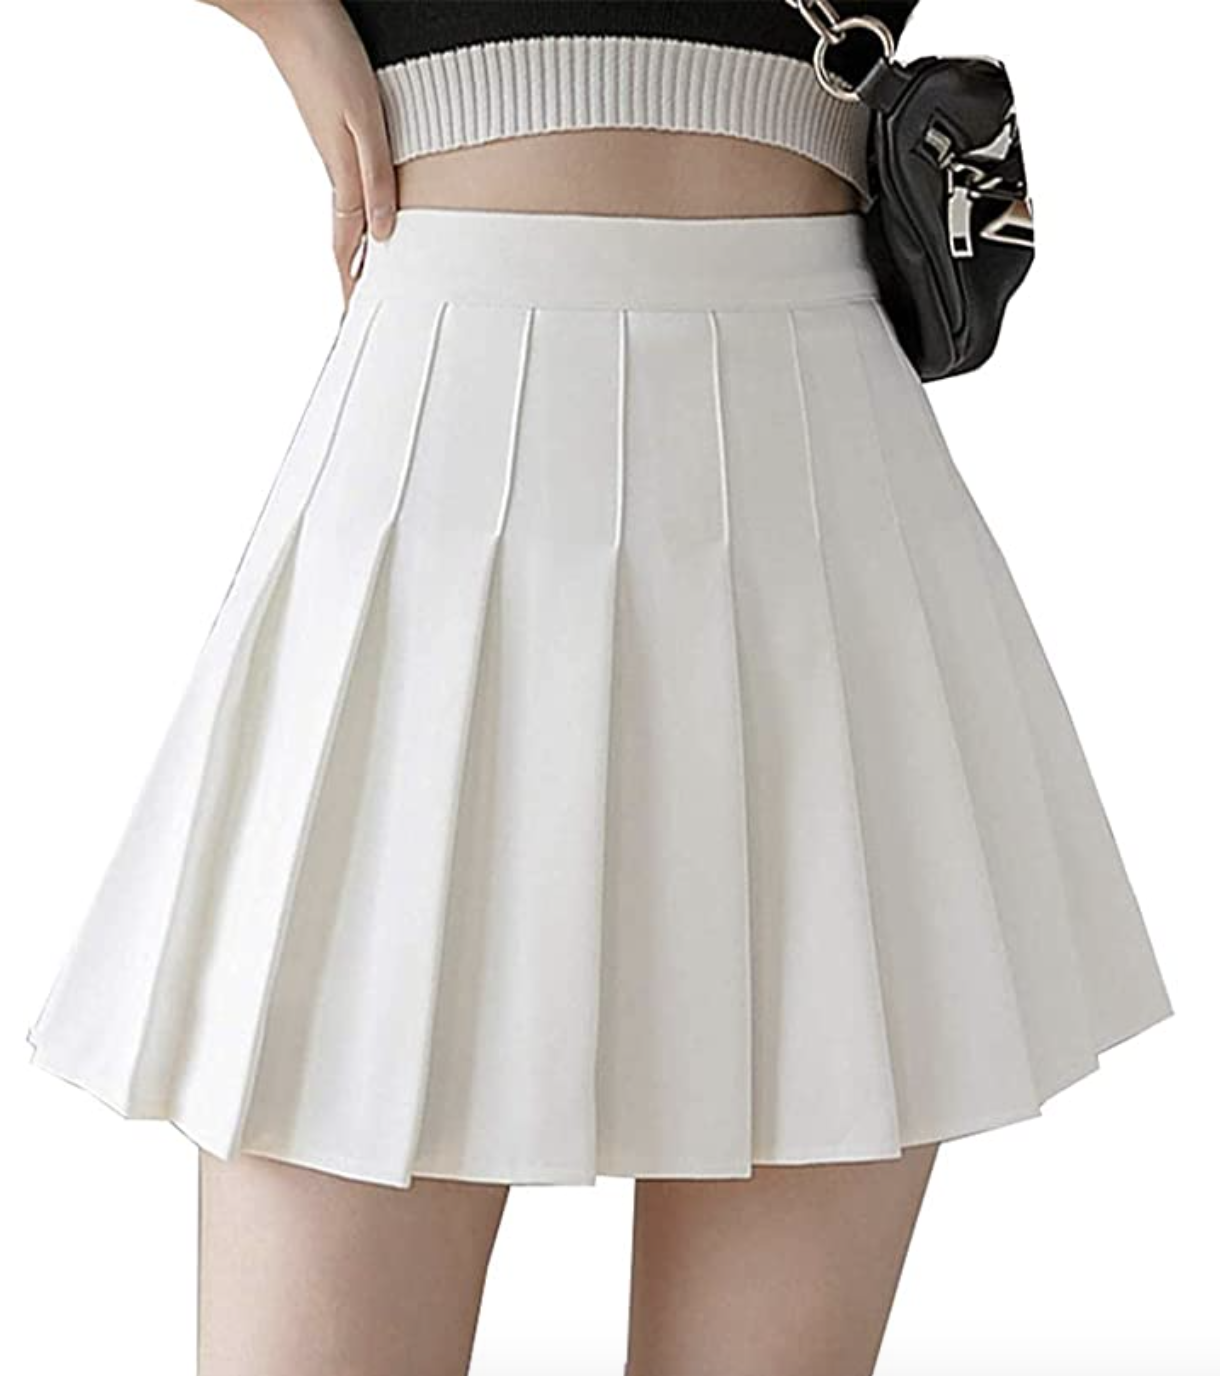 21 Best White Tennis Skirts: Fashionable Options For Every Style